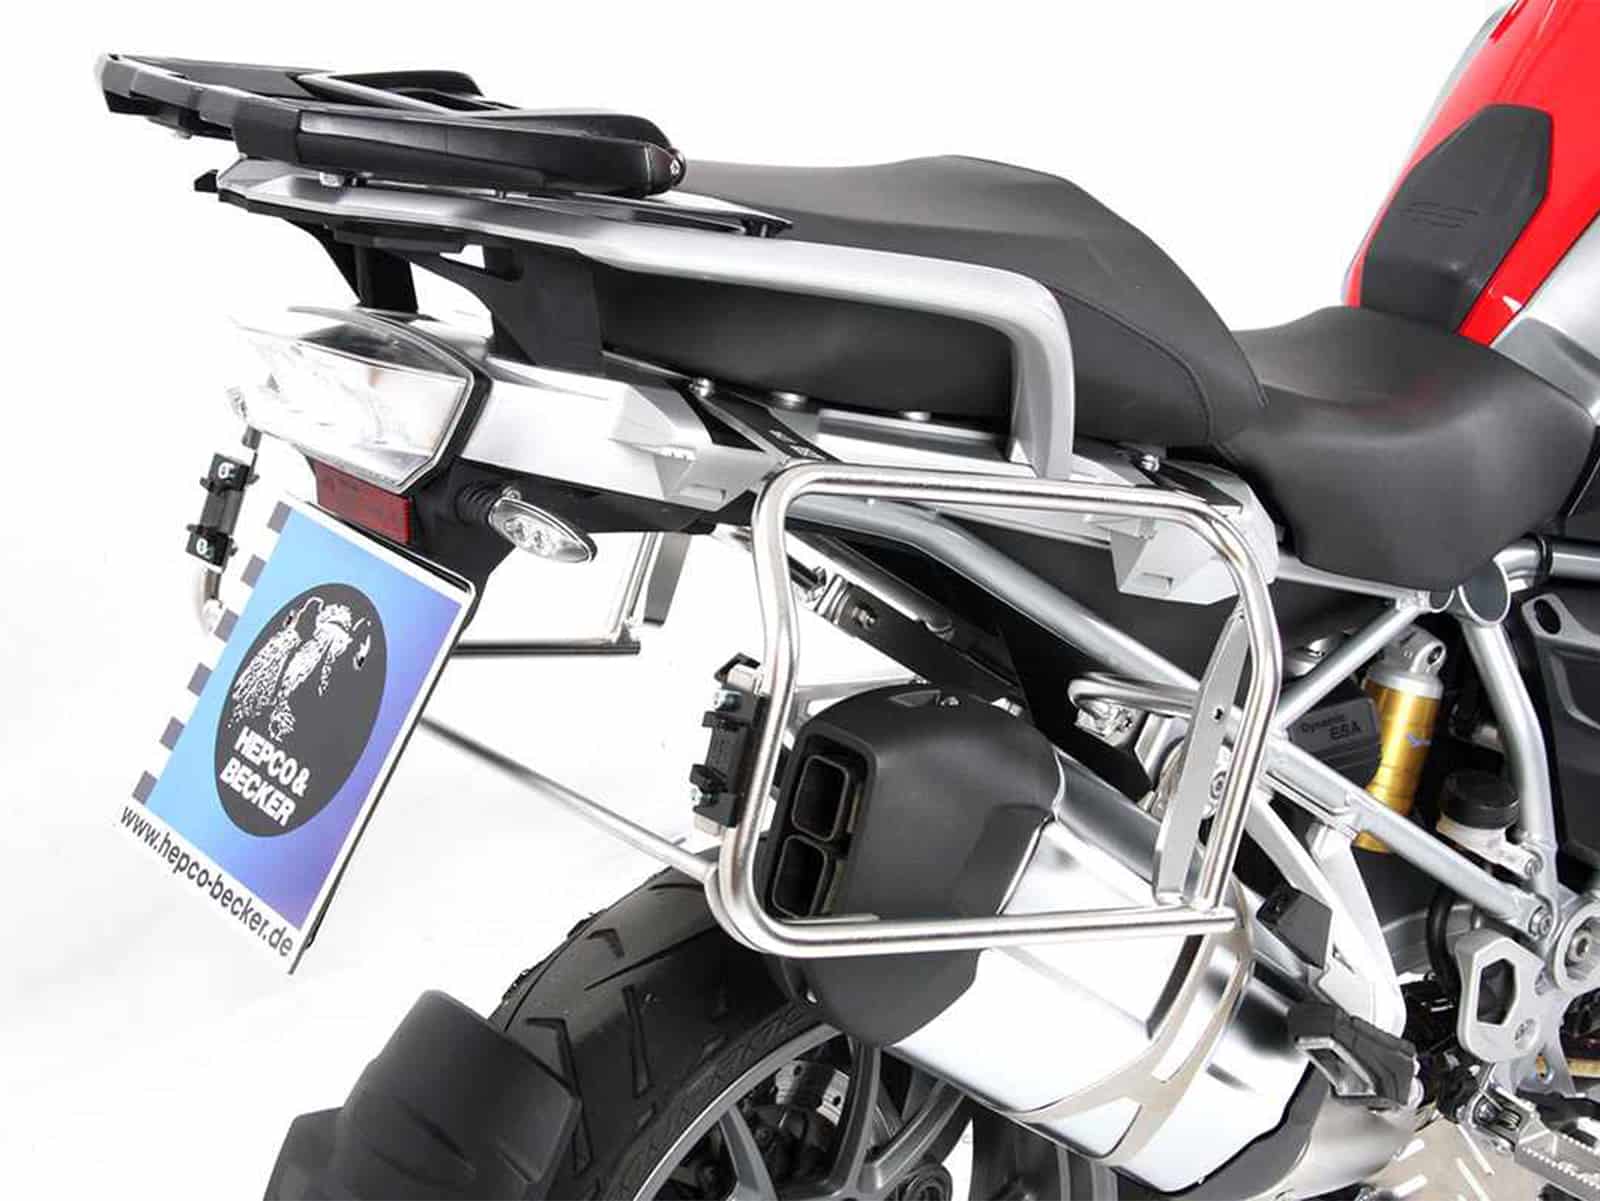 Sidecarrier Cutout stainless steel incl. Xplorer sideboxes silver for BMW R1200GS LC Adventure (2014-)